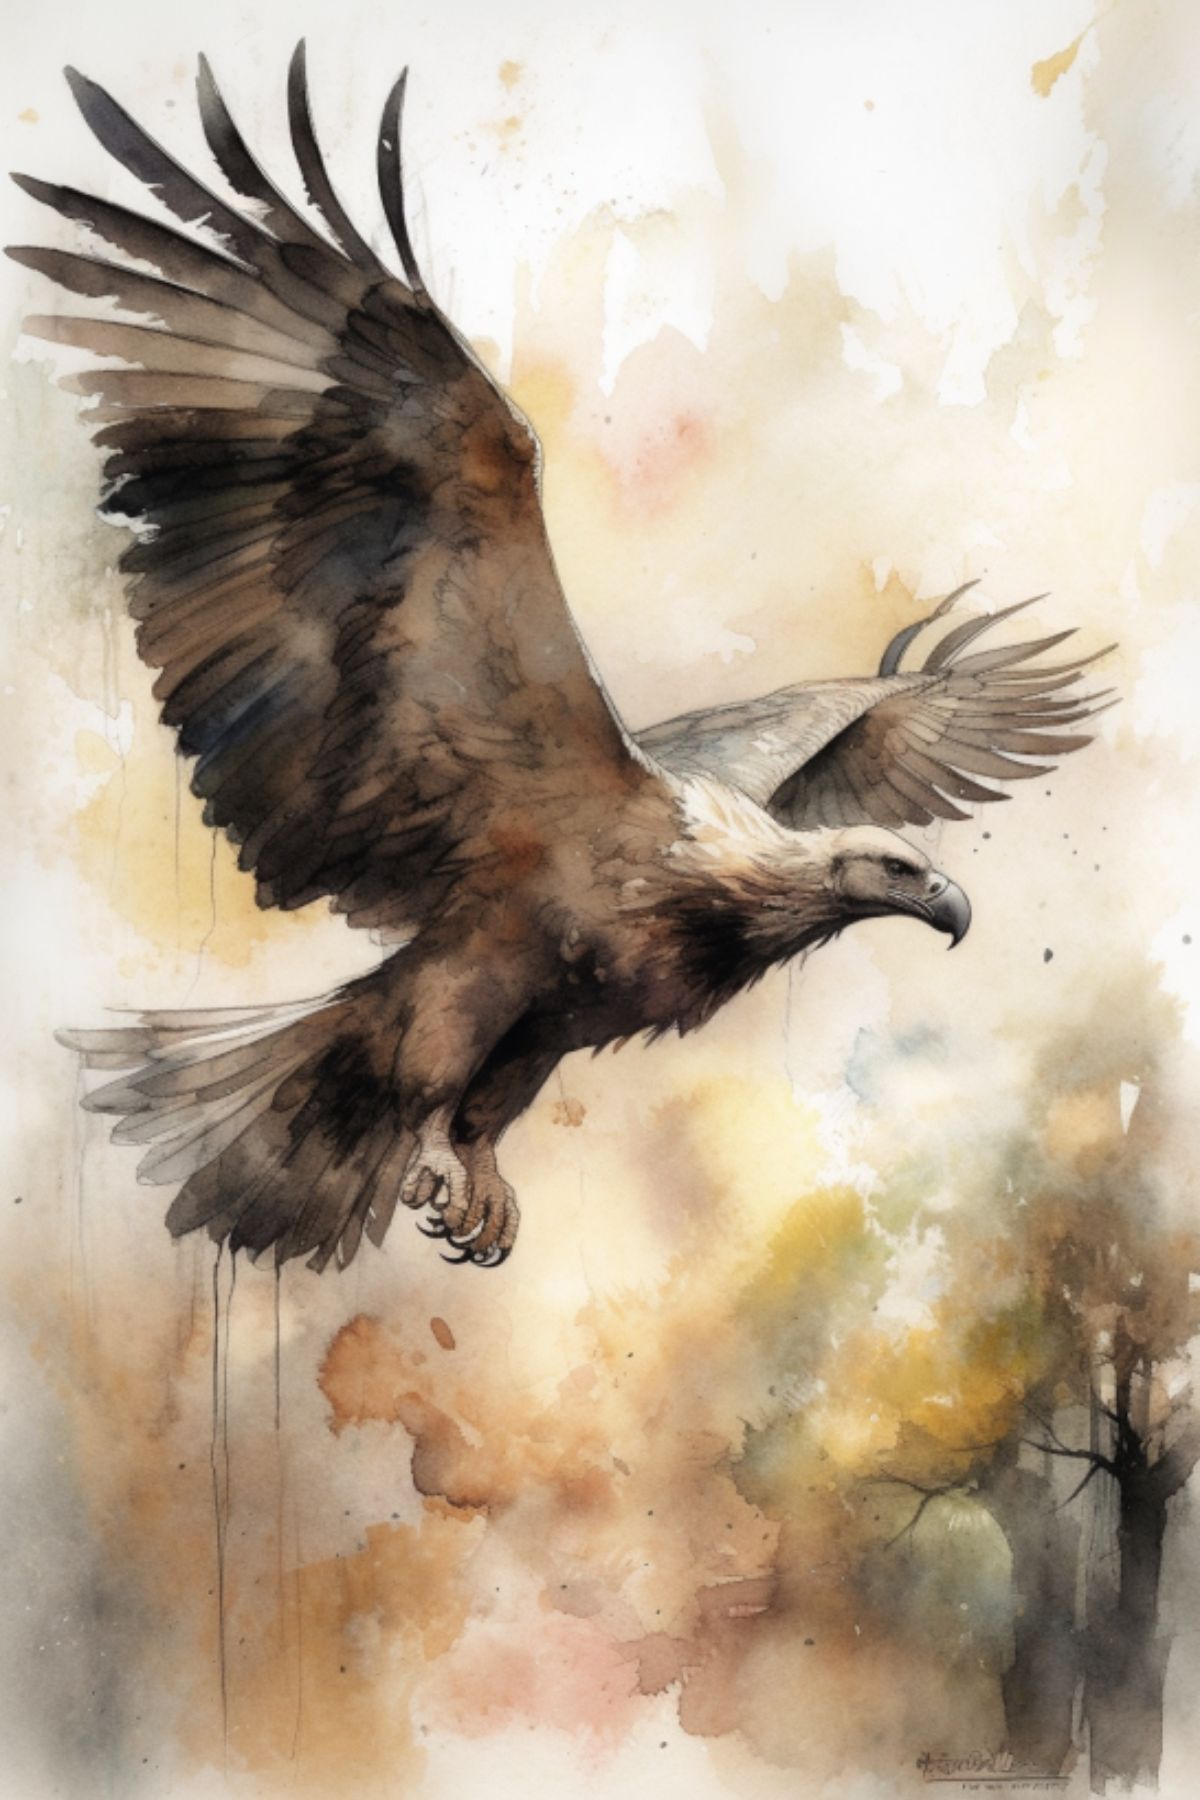 vulture watercolor painting inspired by the Bible